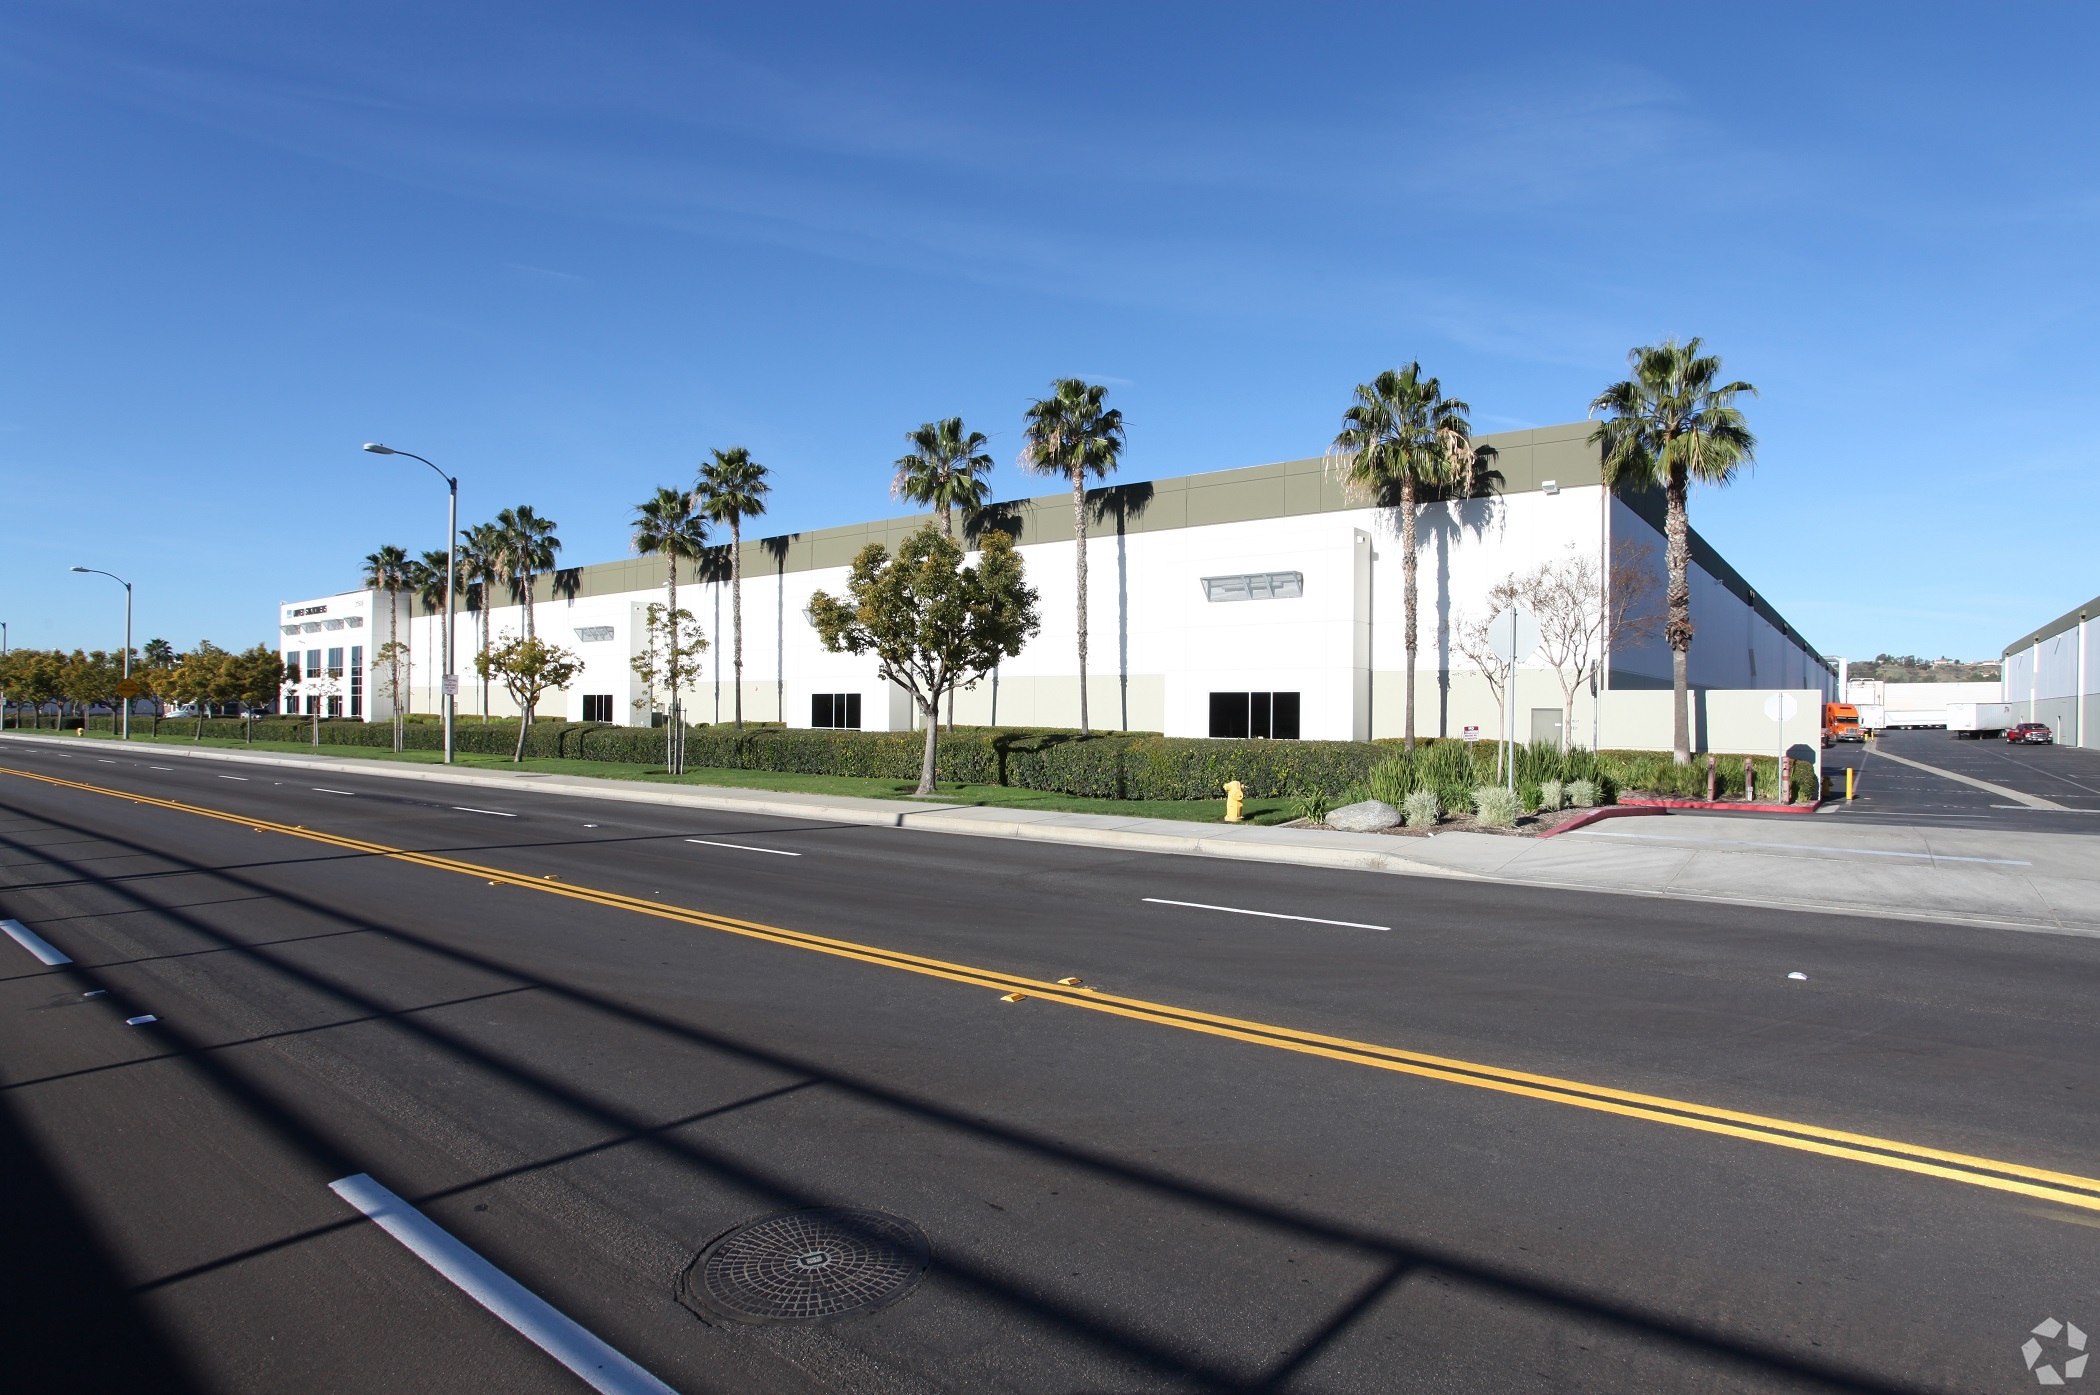 The 274,474-square-foot warehouse leased by China-based logistics company Weida Freight System is located at 21508 Ferrero Parkway in the City of Industry. (CoStar)